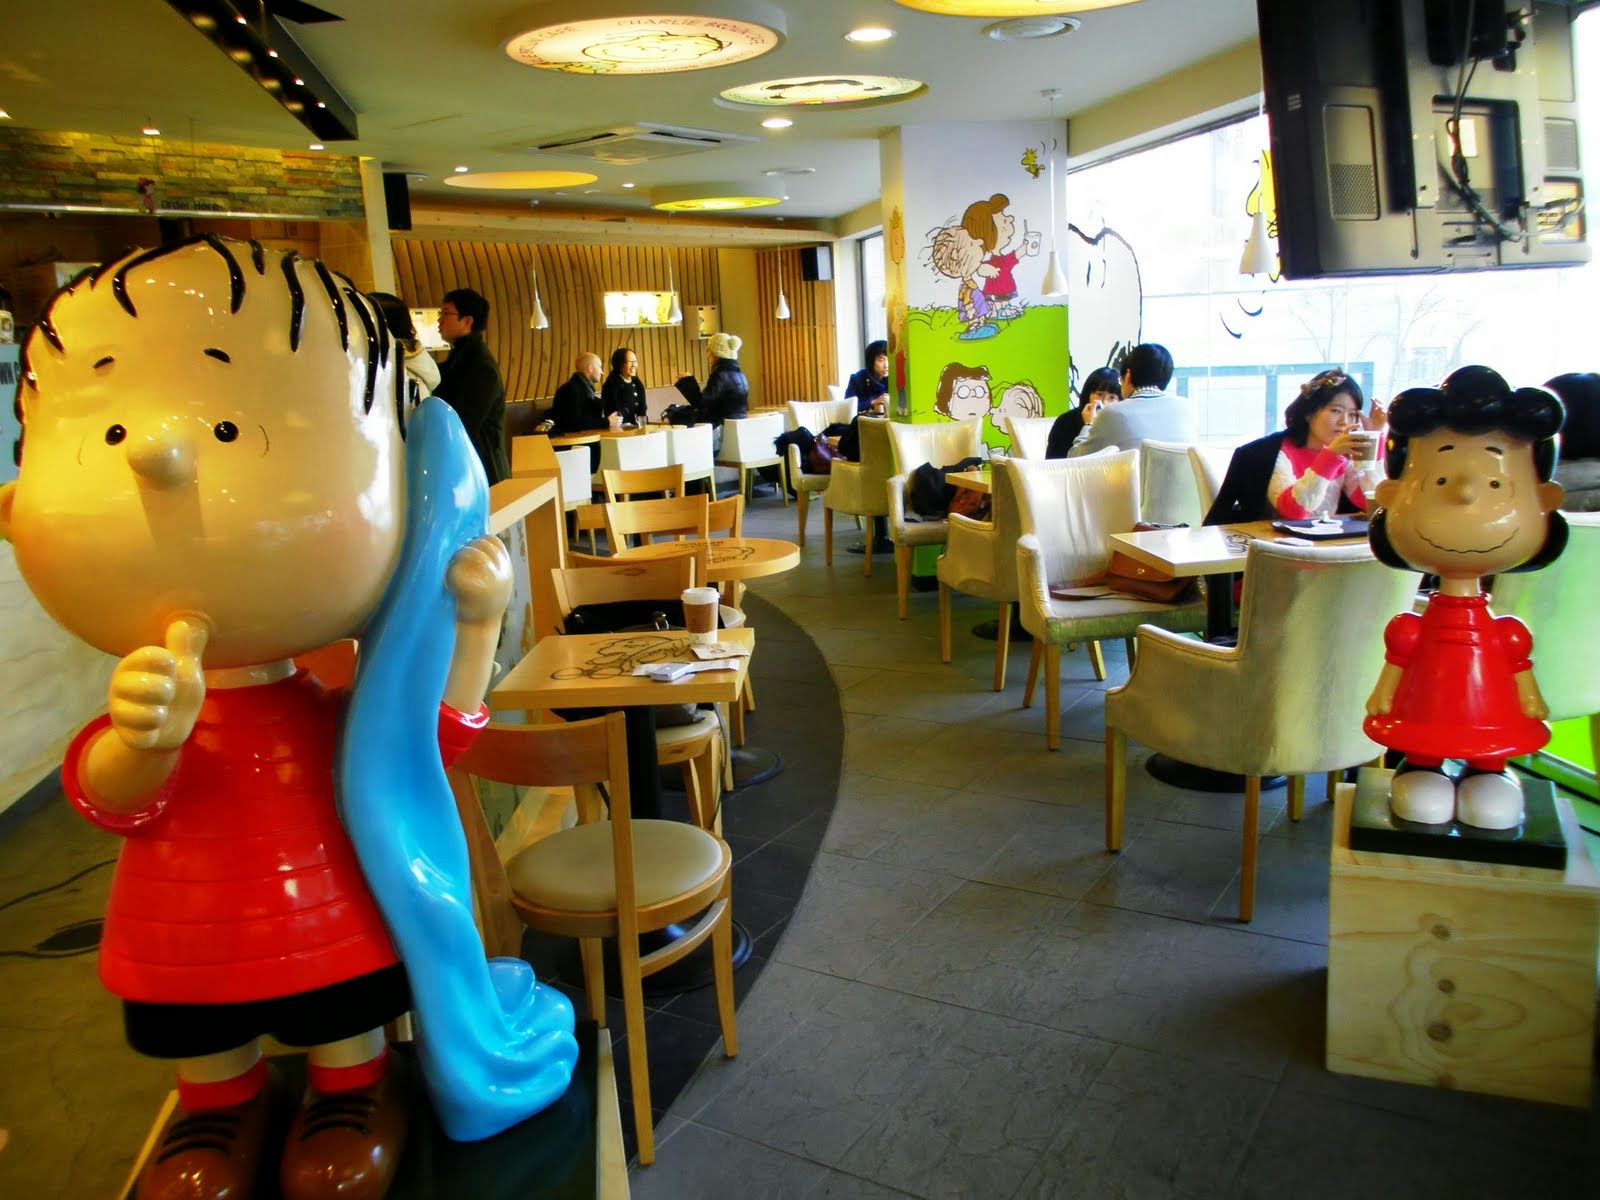 The interior of the Charlie Brown Cafe. Image from blogspot.com.